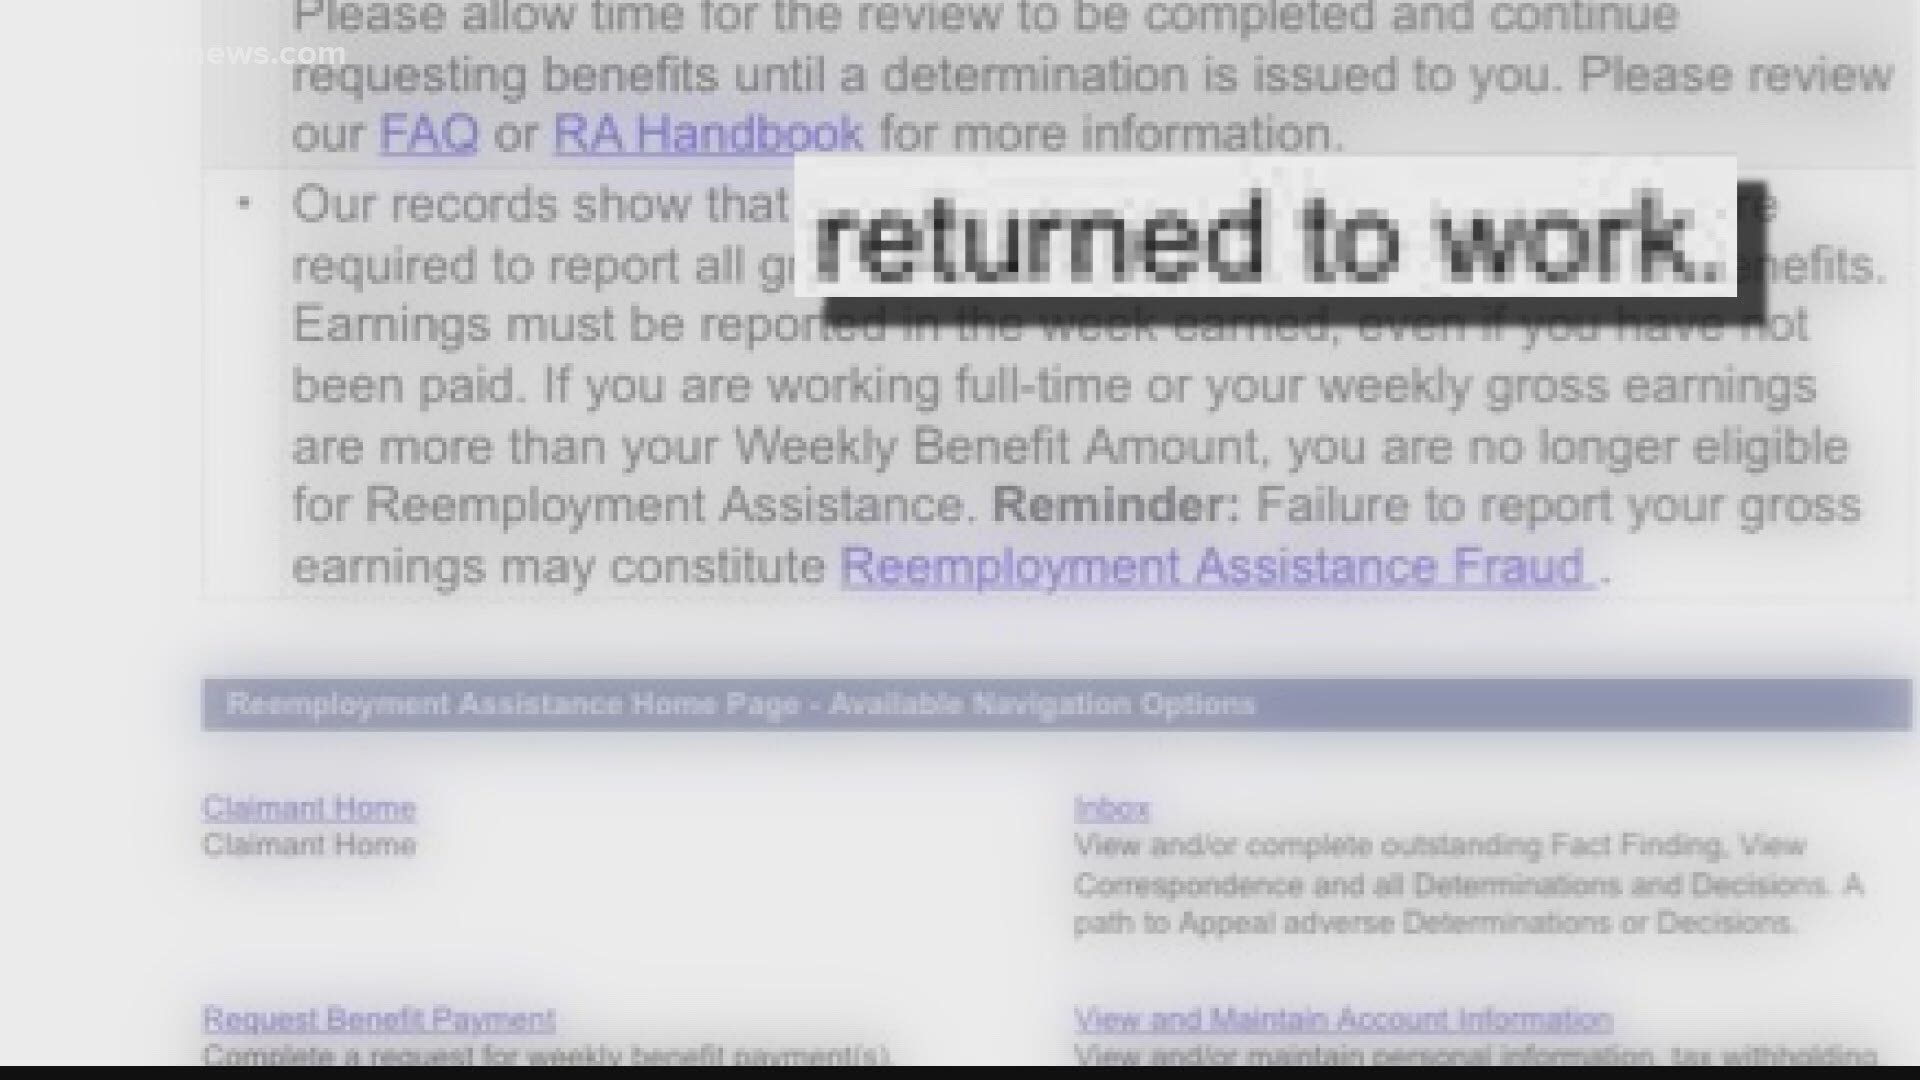 Some people collecting unemployment benefits had their payments put on hold after job interviews or temporary jobs.